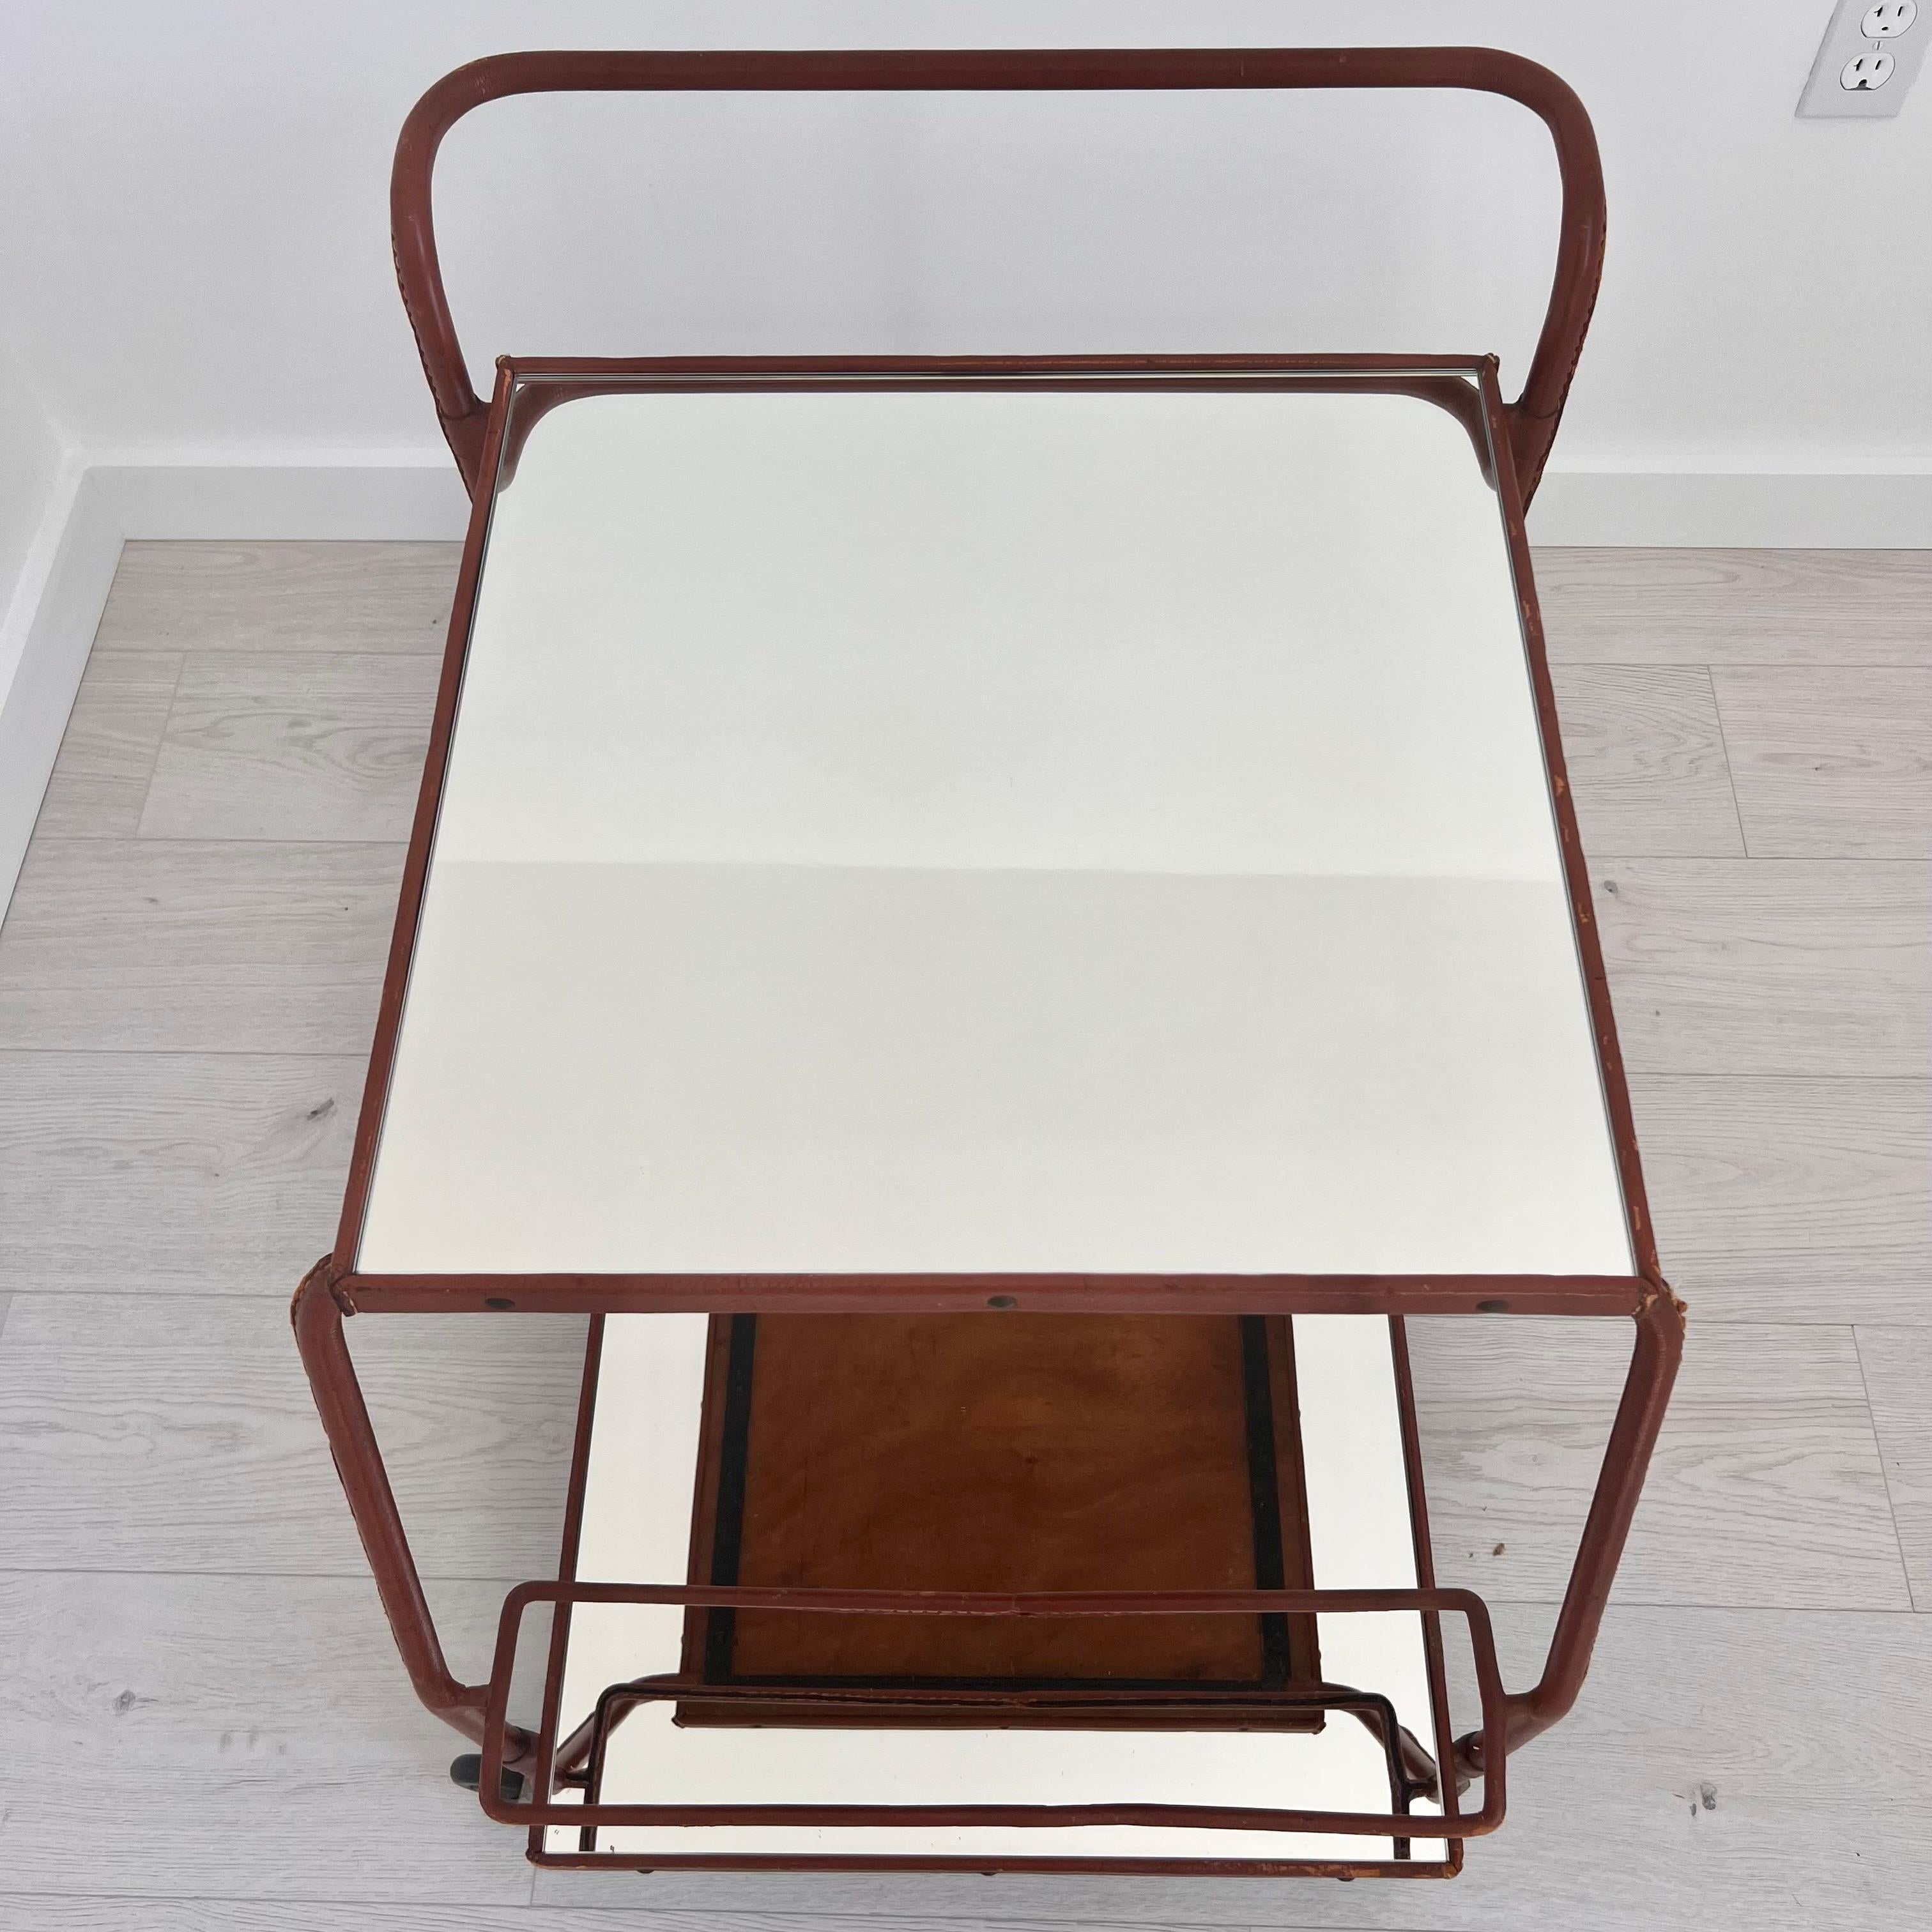 Jacques Adnet Brown Leather Bar Cart, 1950s France For Sale 2